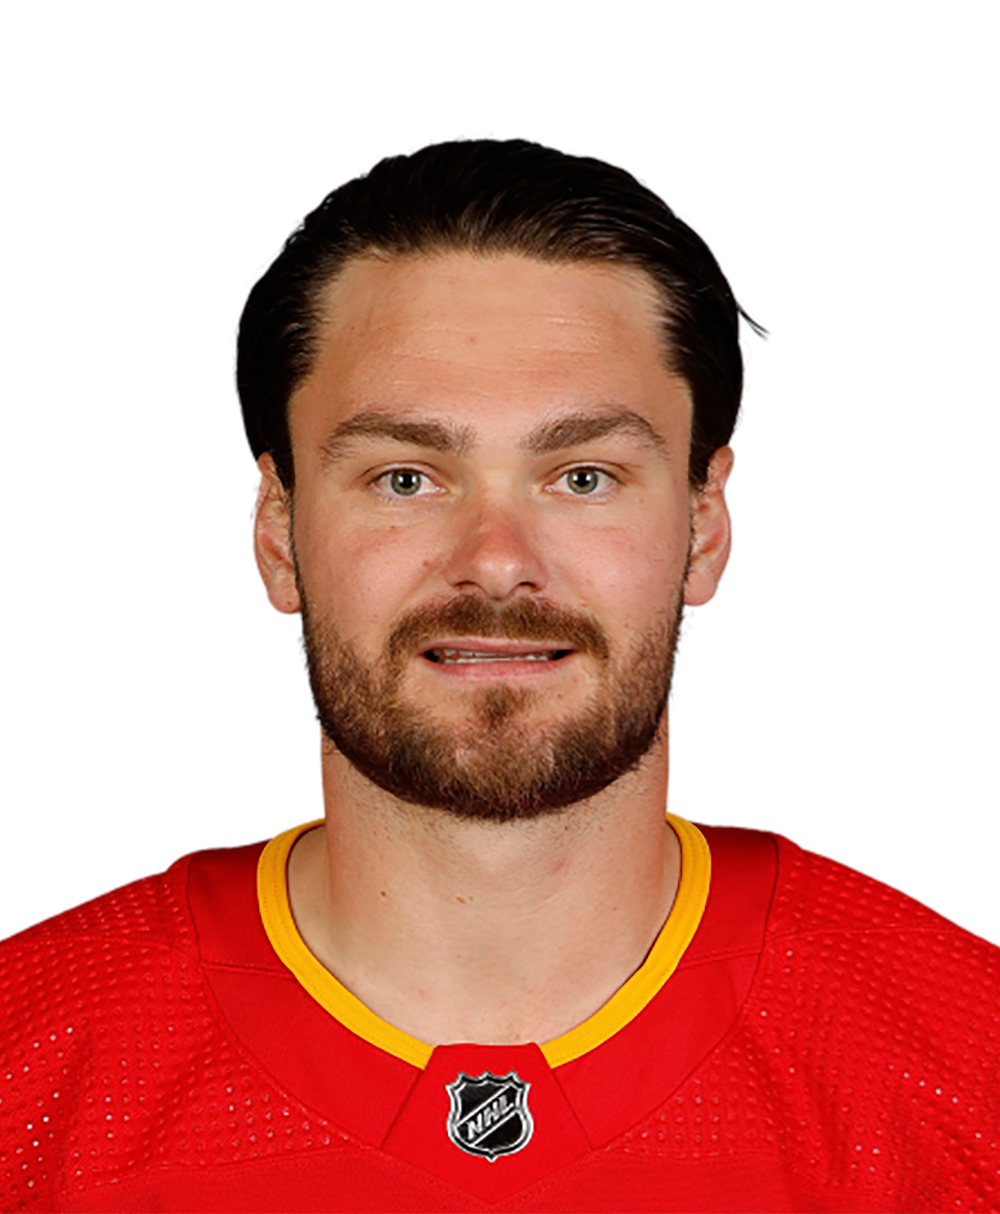 Calgary Flames' Rasmus Andersson Is 'OK' After Being Struck by Vehicle